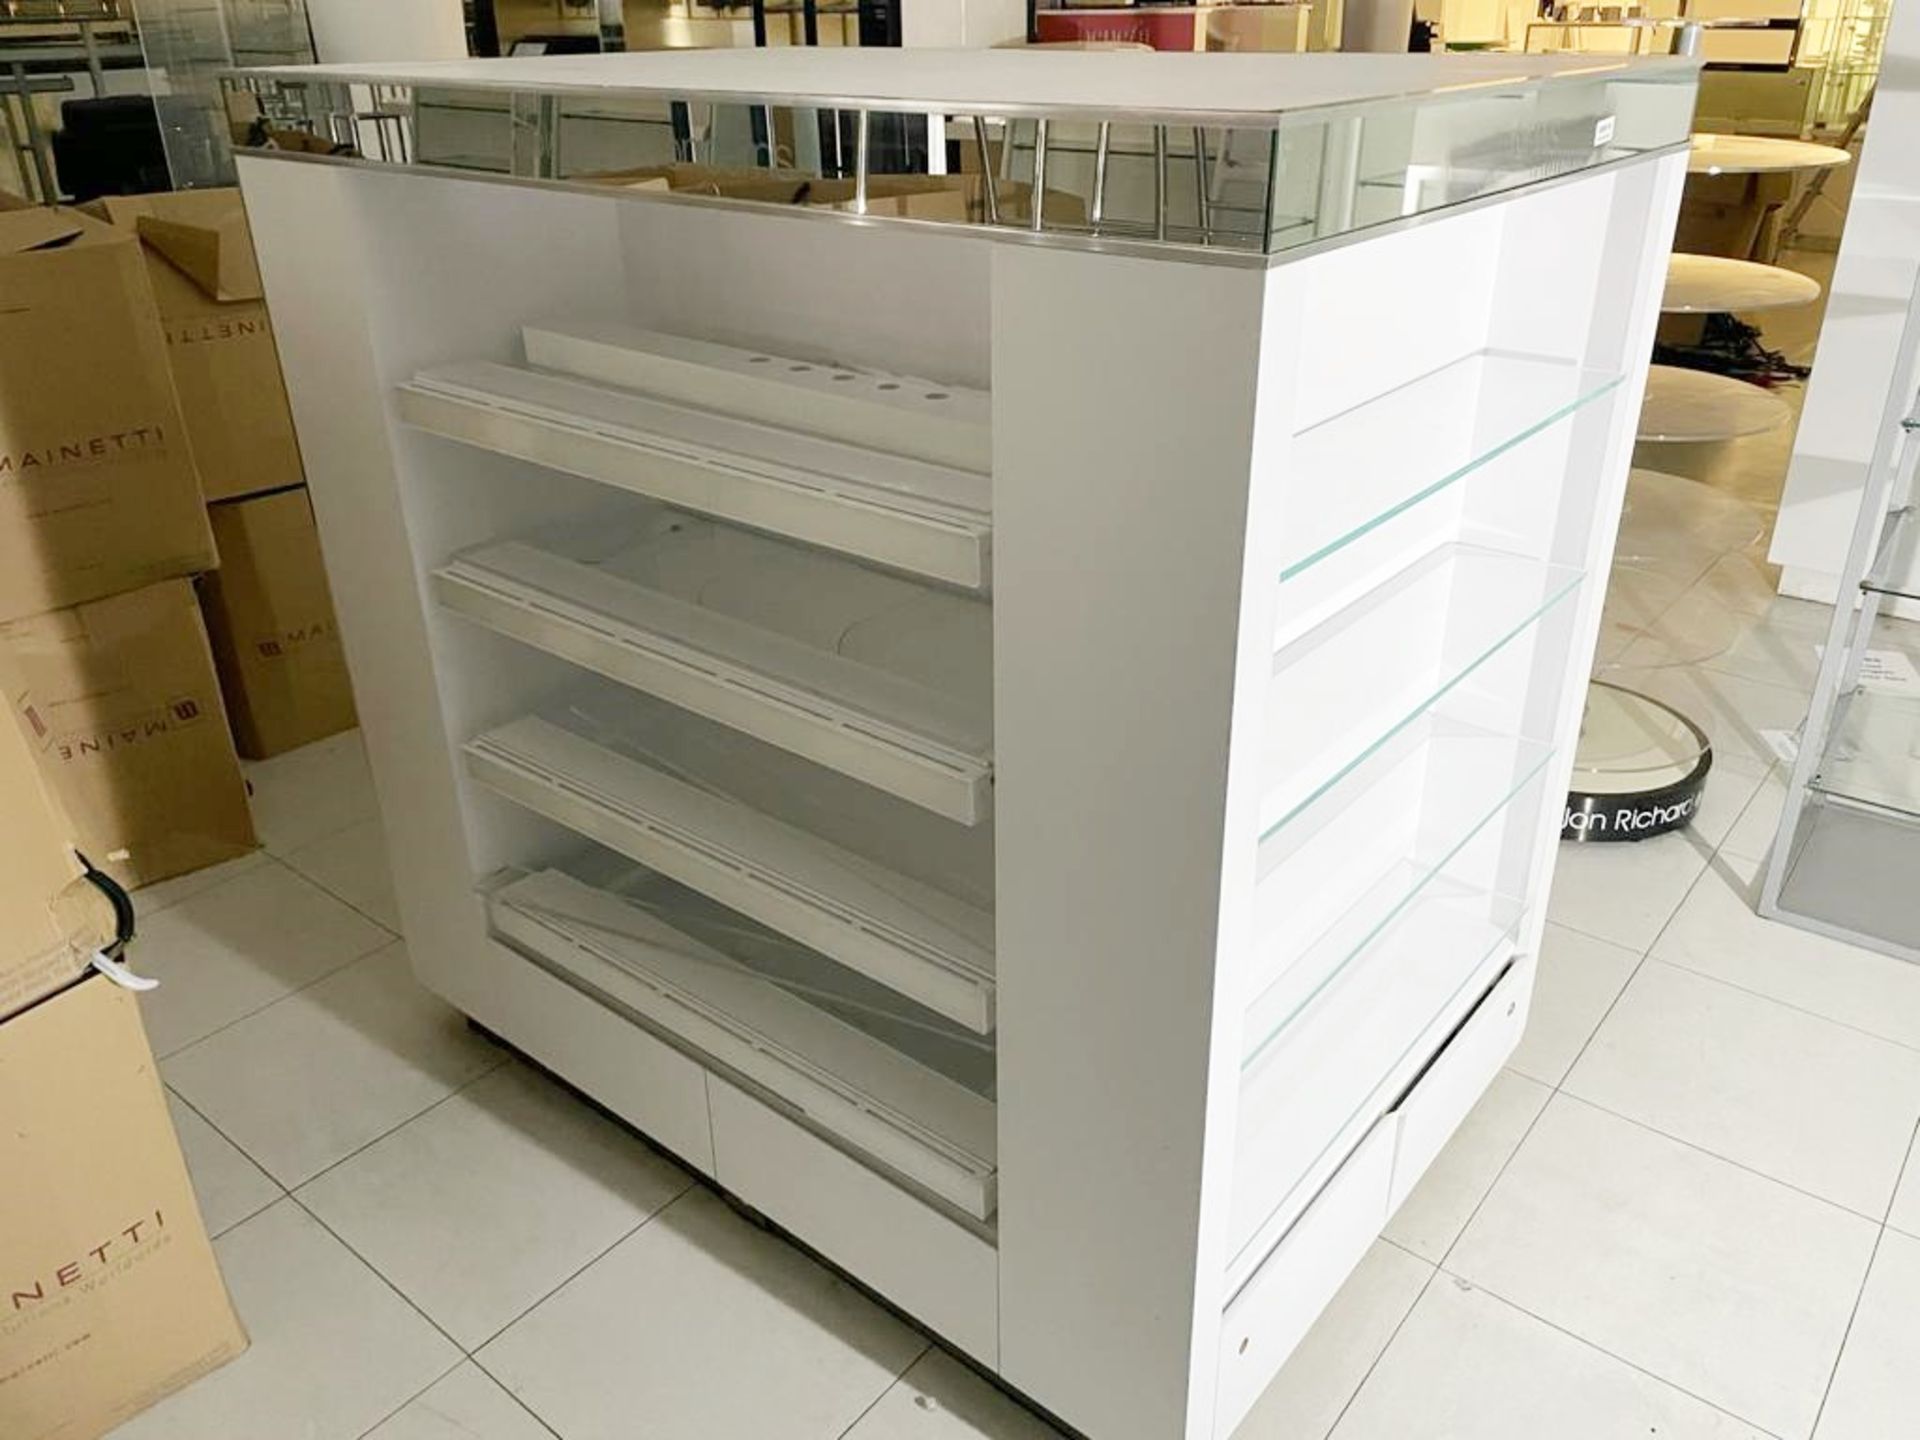 1 x Retail Four Sided Display Island With Shelves, Storage Drawers and Mirrored Panels - Size H150 x - Image 8 of 10